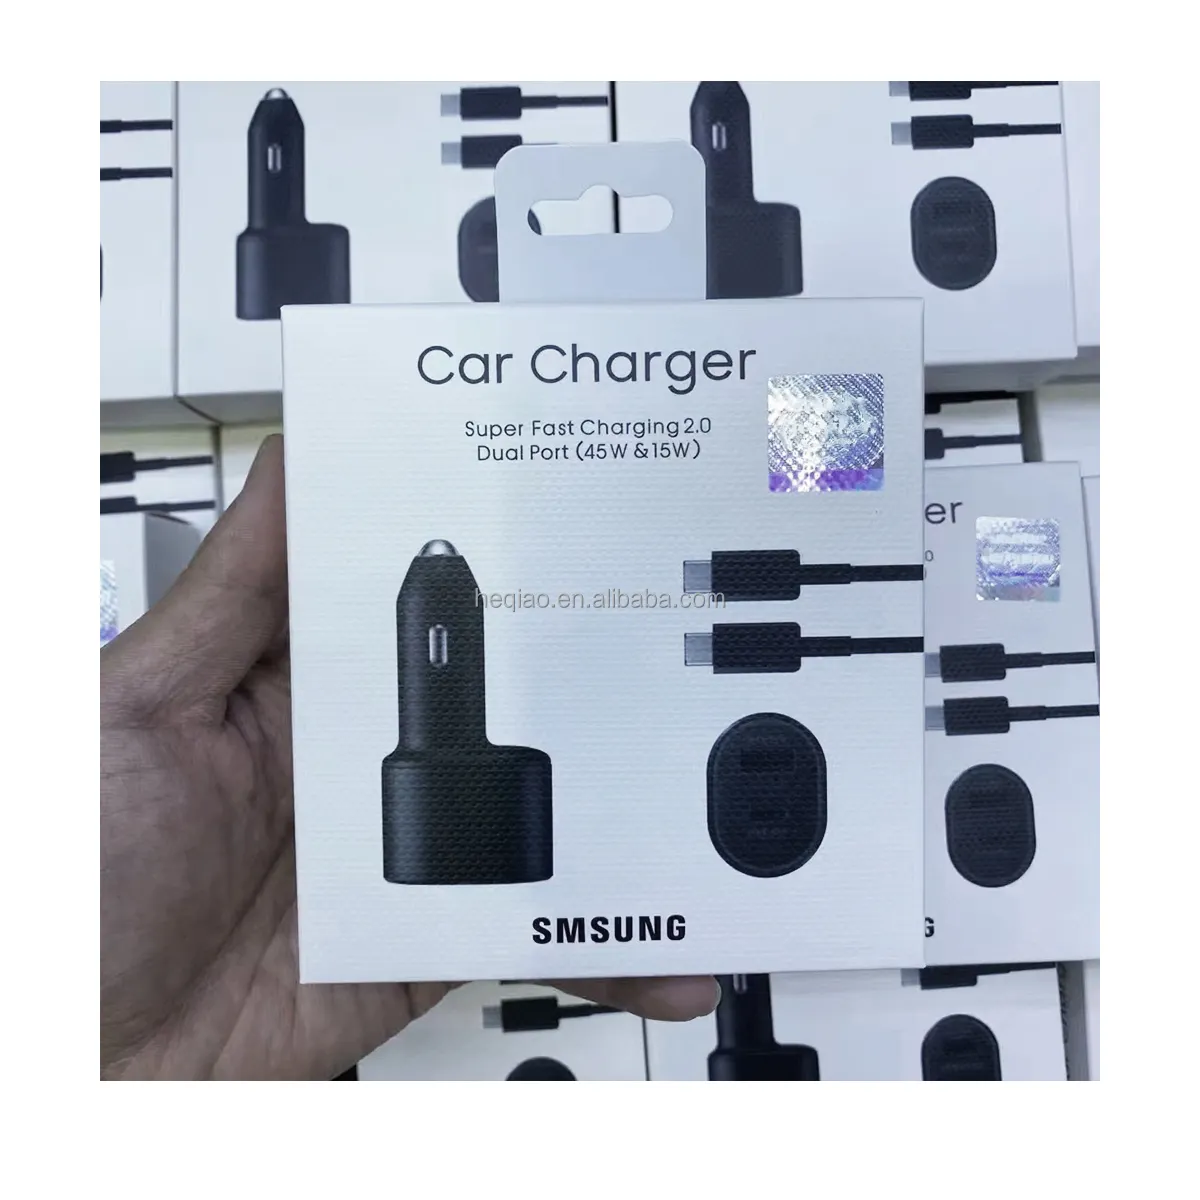 For Samsung Car charger 45W+15W QC4.0 Super fast Dual port USB type C Car charger for Samsung USB C Adapter for iPhone